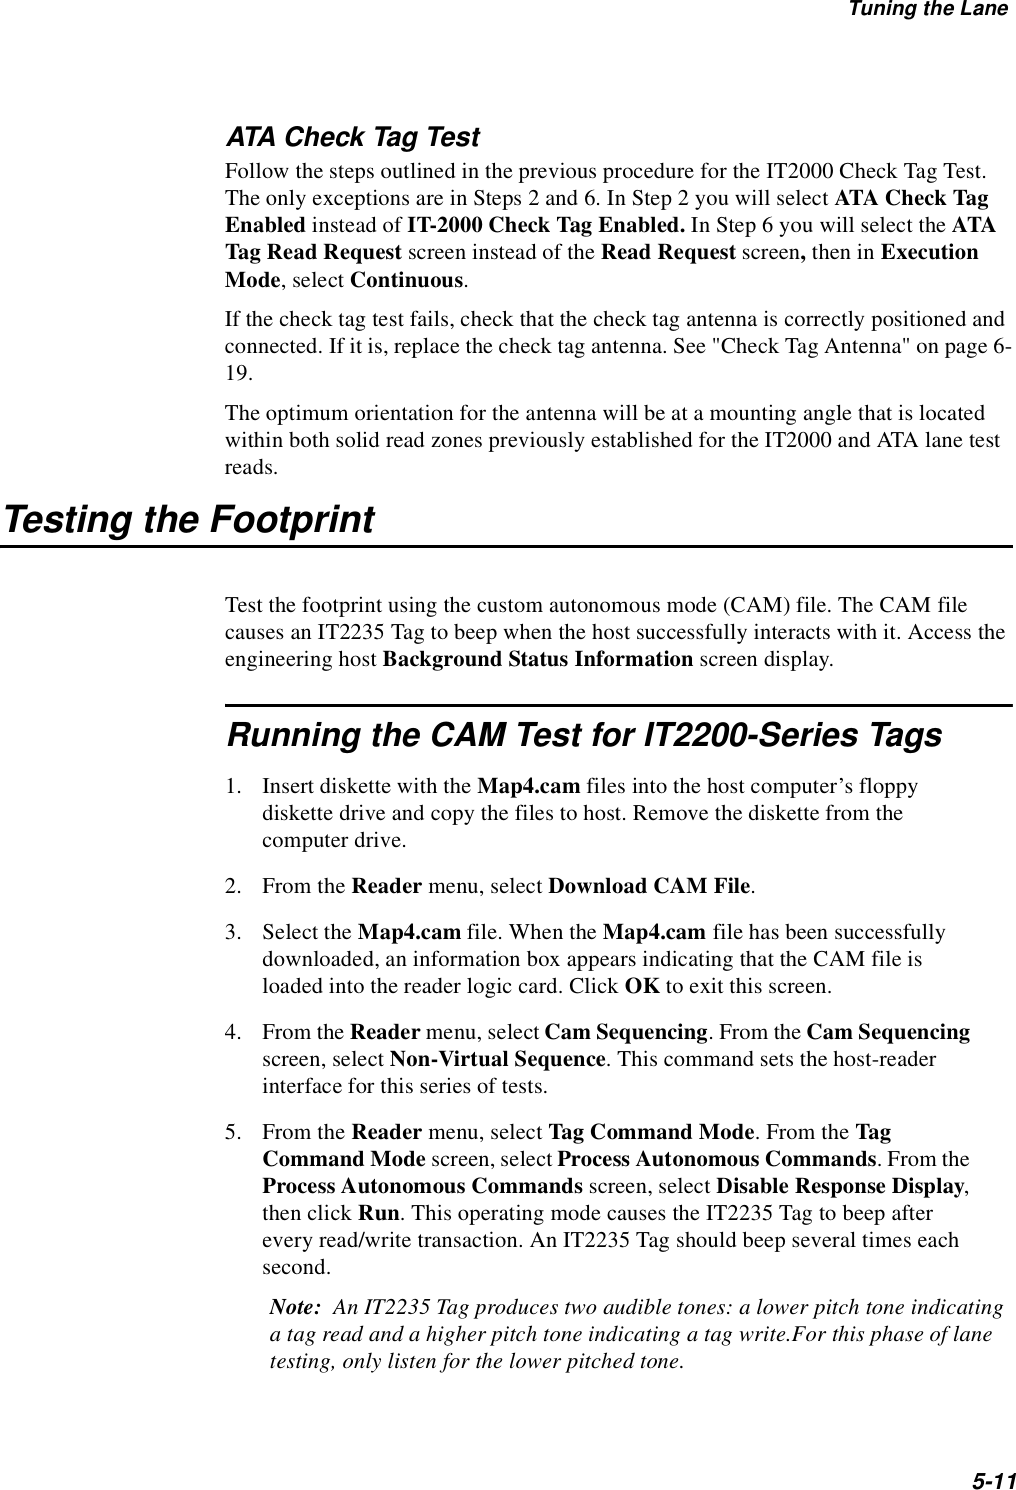 Tuning the Lane5-11ATA Check Tag TestFollow the steps outlined in the previous procedure for the IT2000 Check Tag Test. The only exceptions are in Steps 2 and 6. In Step 2 you will select ATA Check Tag Enabled instead of IT-2000 Check Tag Enabled. In Step 6 you will select the ATA Tag Read Request screen instead of the Read Request screen, then in Execution Mode, select Continuous.If the check tag test fails, check that the check tag antenna is correctly positioned and connected. If it is, replace the check tag antenna. See &quot;Check Tag Antenna&quot; on page 6-19.The optimum orientation for the antenna will be at a mounting angle that is located within both solid read zones previously established for the IT2000 and ATA lane test reads.Testing the FootprintTest the footprint using the custom autonomous mode (CAM) file. The CAM file causes an IT2235 Tag to beep when the host successfully interacts with it. Access the engineering host Background Status Information screen display.Running the CAM Test for IT2200-Series Tags1. Insert diskette with the Map4.cam files into the host computer’s floppy diskette drive and copy the files to host. Remove the diskette from the computer drive.2. From the Reader menu, select Download CAM File.3. Select the Map4.cam file. When the Map4.cam file has been successfully downloaded, an information box appears indicating that the CAM file is loaded into the reader logic card. Click OK to exit this screen.4. From the Reader menu, select Cam Sequencing. From the Cam Sequencing screen, select Non-Virtual Sequence. This command sets the host-reader interface for this series of tests.5. From the Reader menu, select Tag Command Mode. From the Tag Command Mode screen, select Process Autonomous Commands. From the Process Autonomous Commands screen, select Disable Response Display, then click Run. This operating mode causes the IT2235 Tag to beep after every read/write transaction. An IT2235 Tag should beep several times each second.Note:  An IT2235 Tag produces two audible tones: a lower pitch tone indicating a tag read and a higher pitch tone indicating a tag write.For this phase of lane testing, only listen for the lower pitched tone.